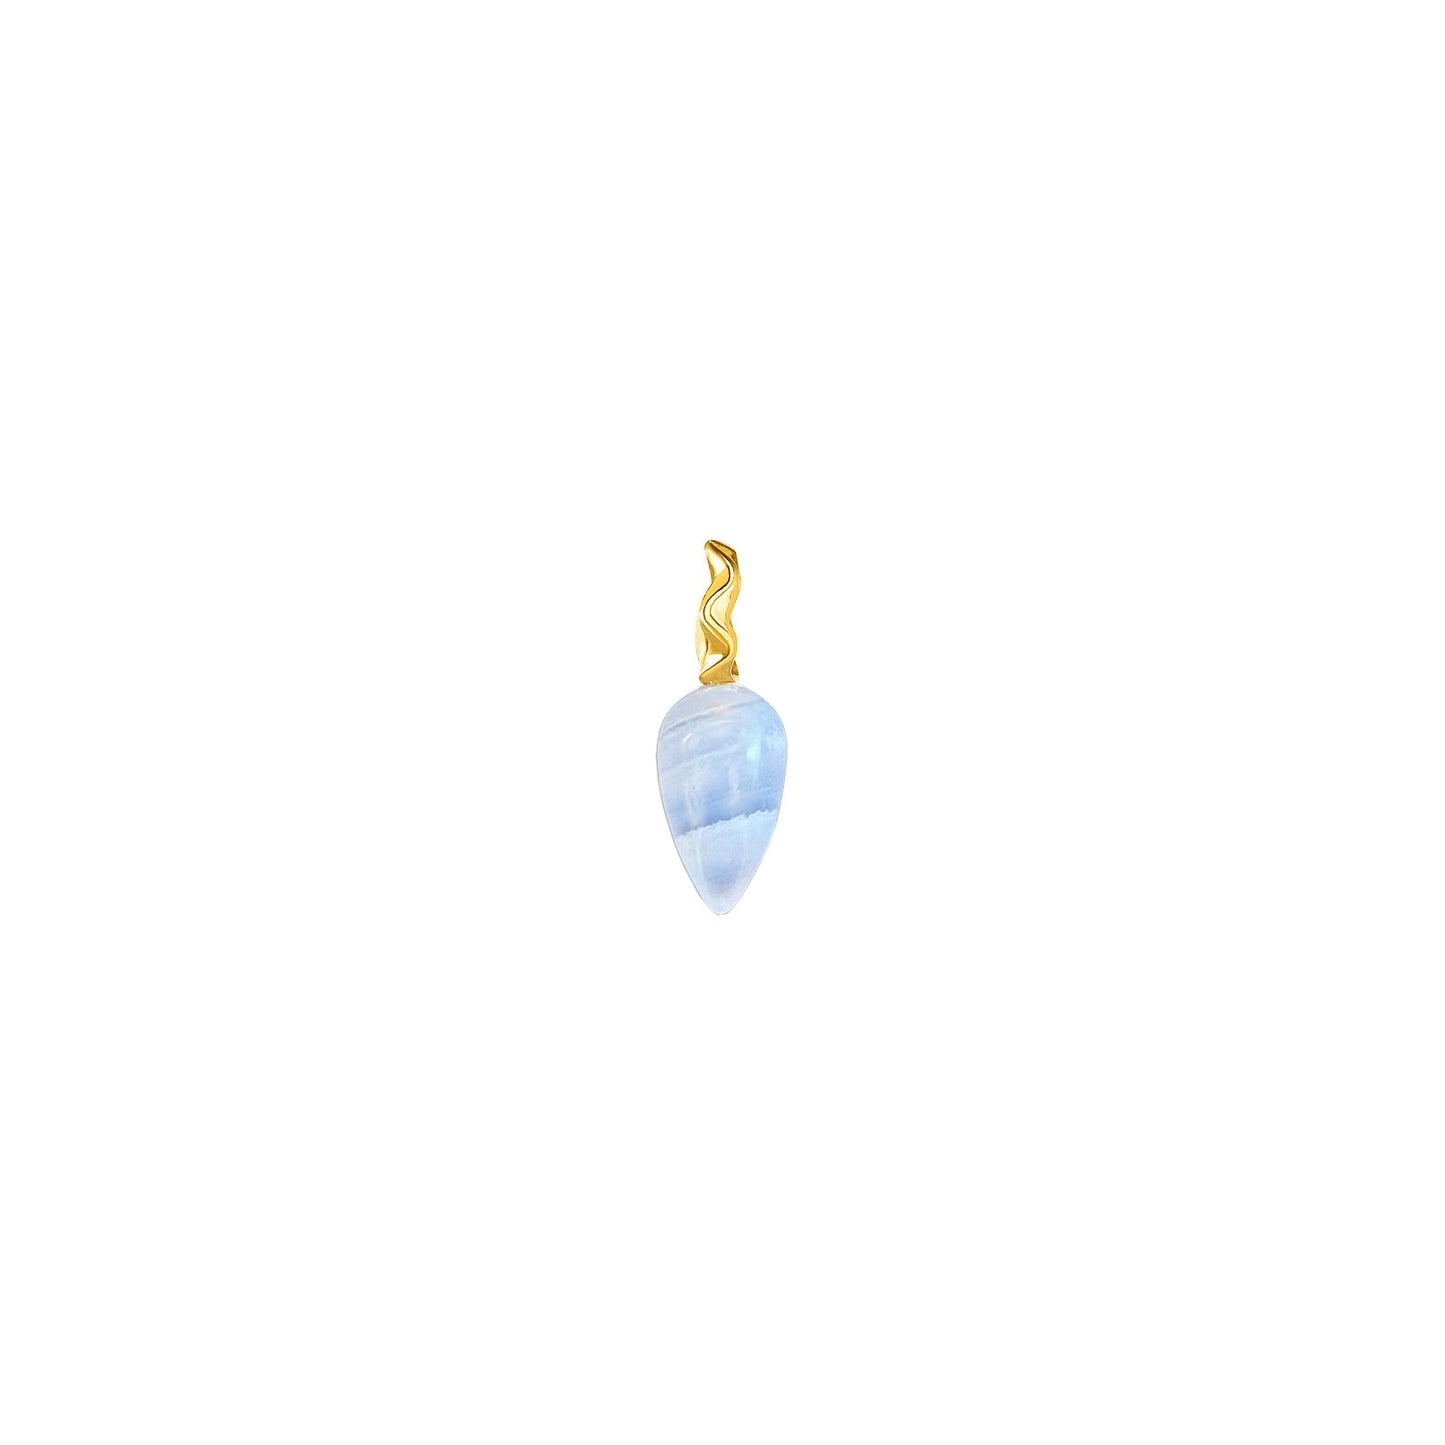 Blue lace agate acorn drop charm with 14k gold bail